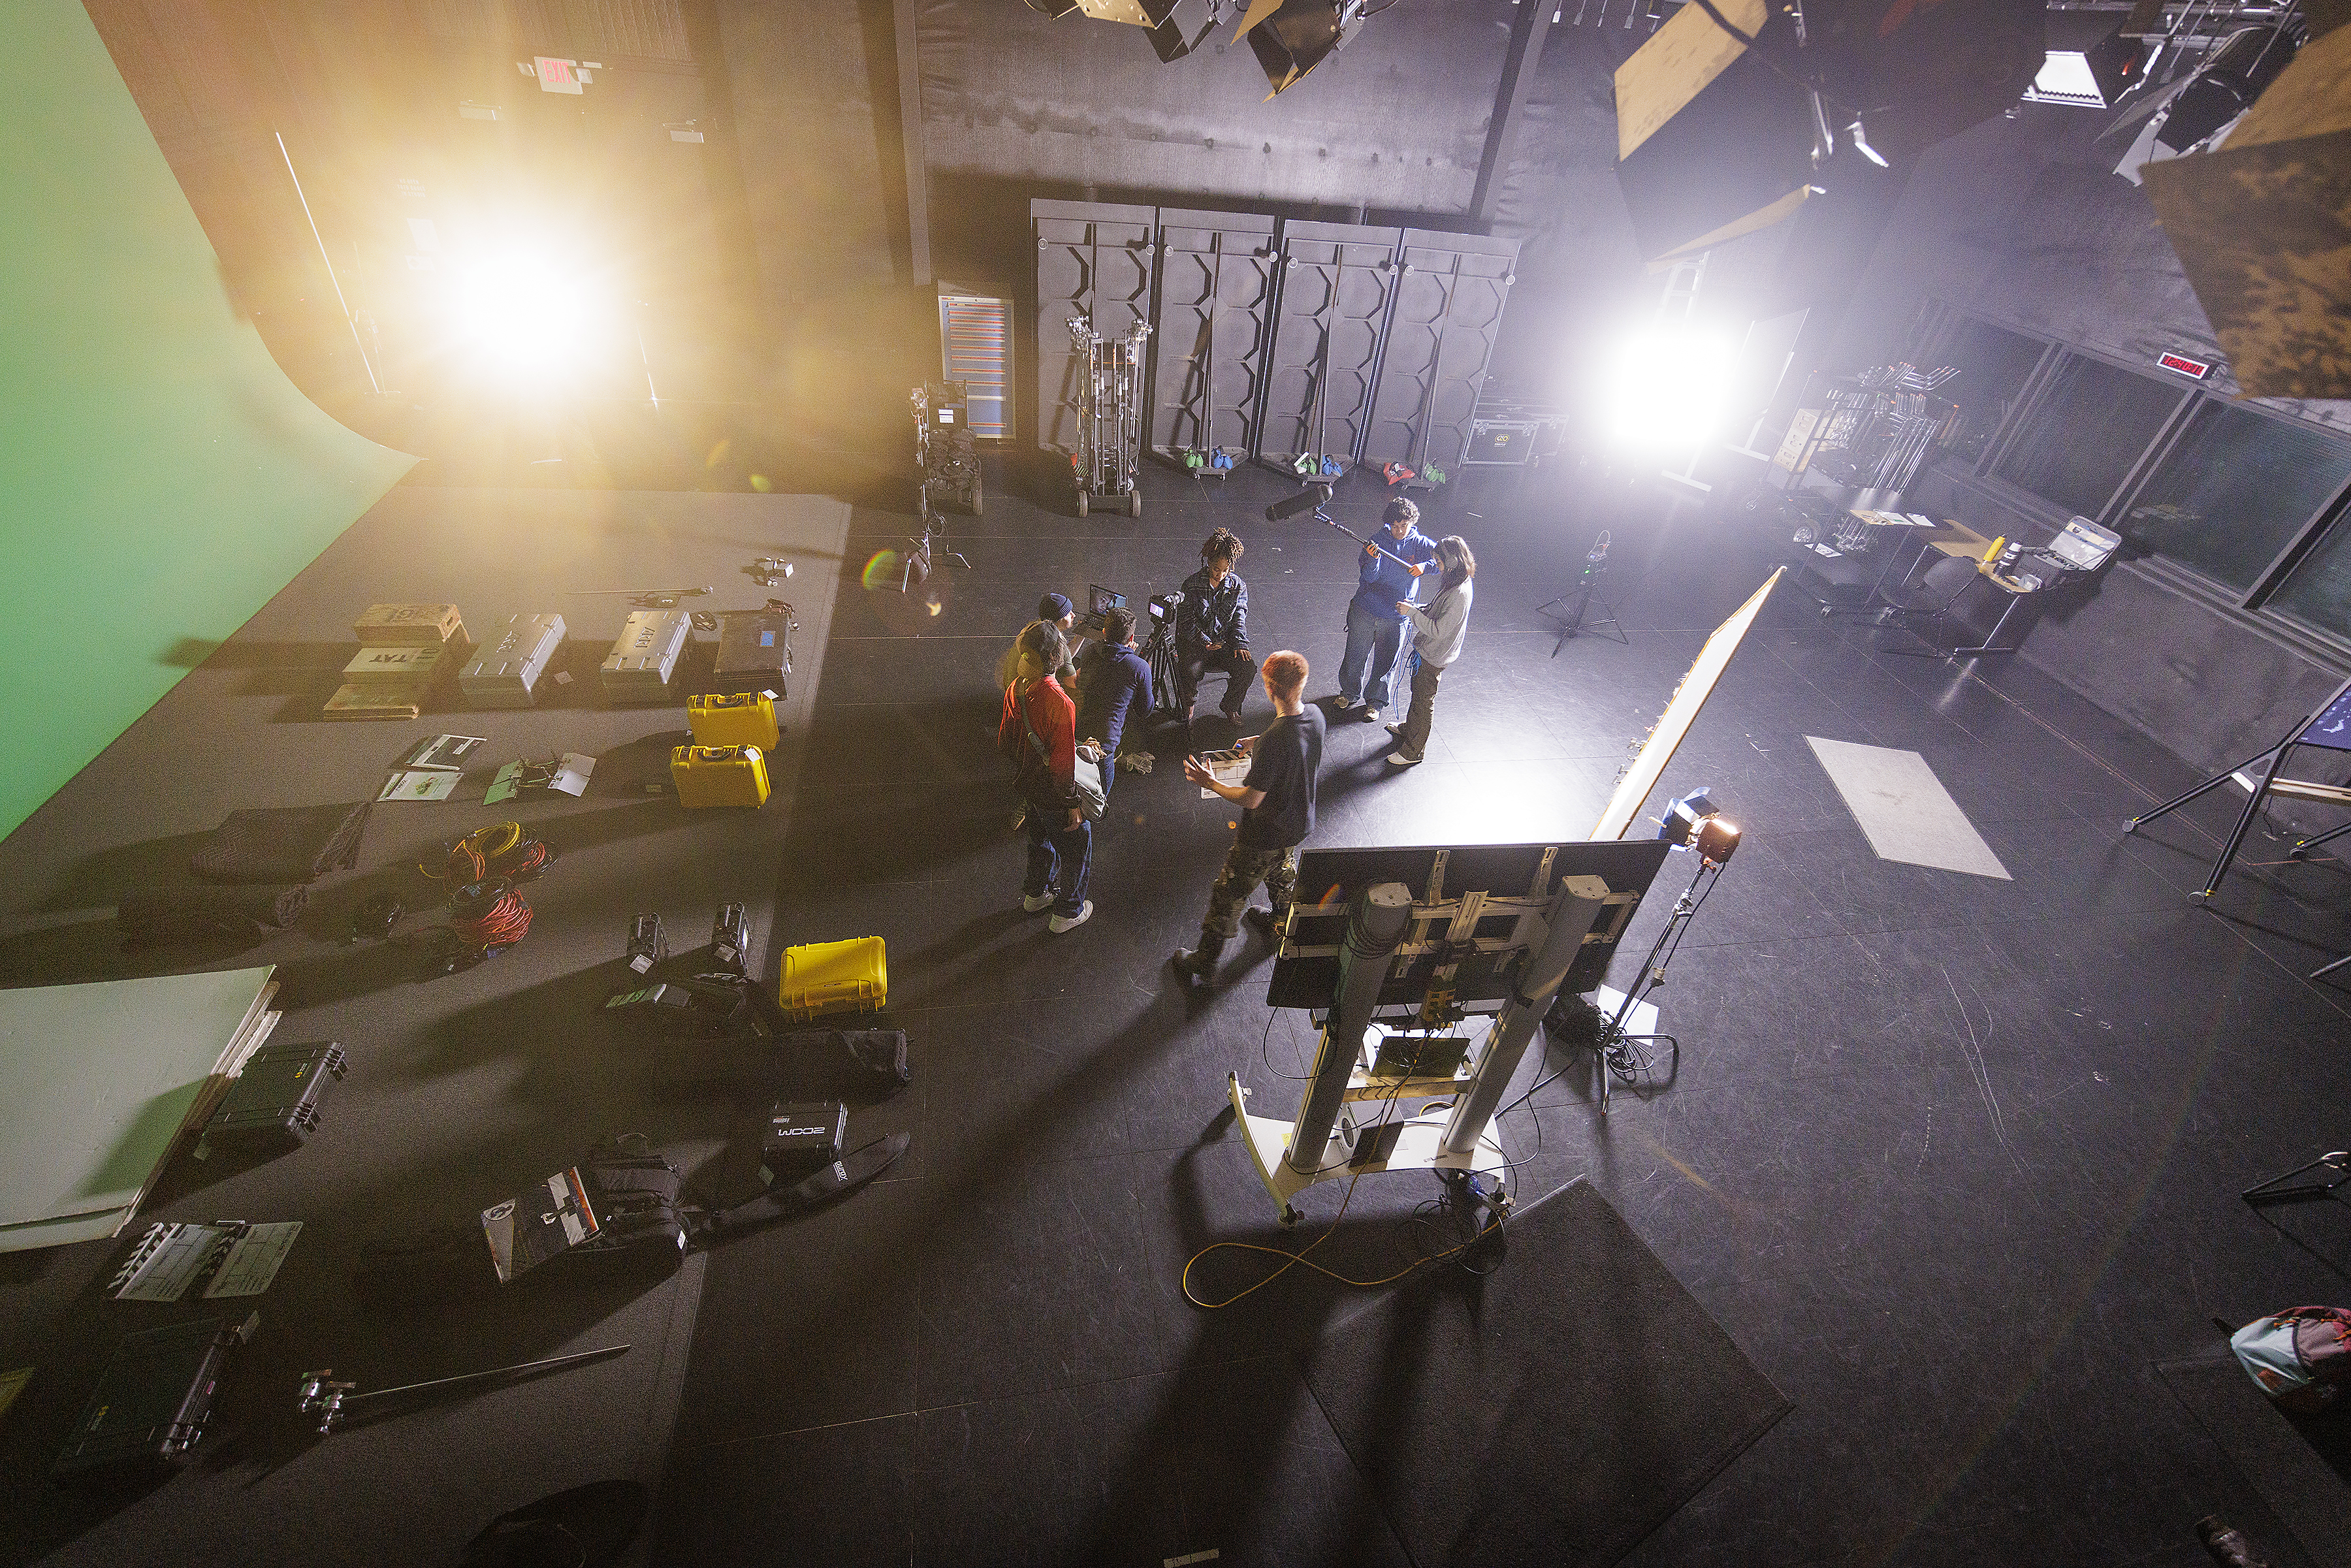 Overhead shot of a group of students in filming studio working on a film project